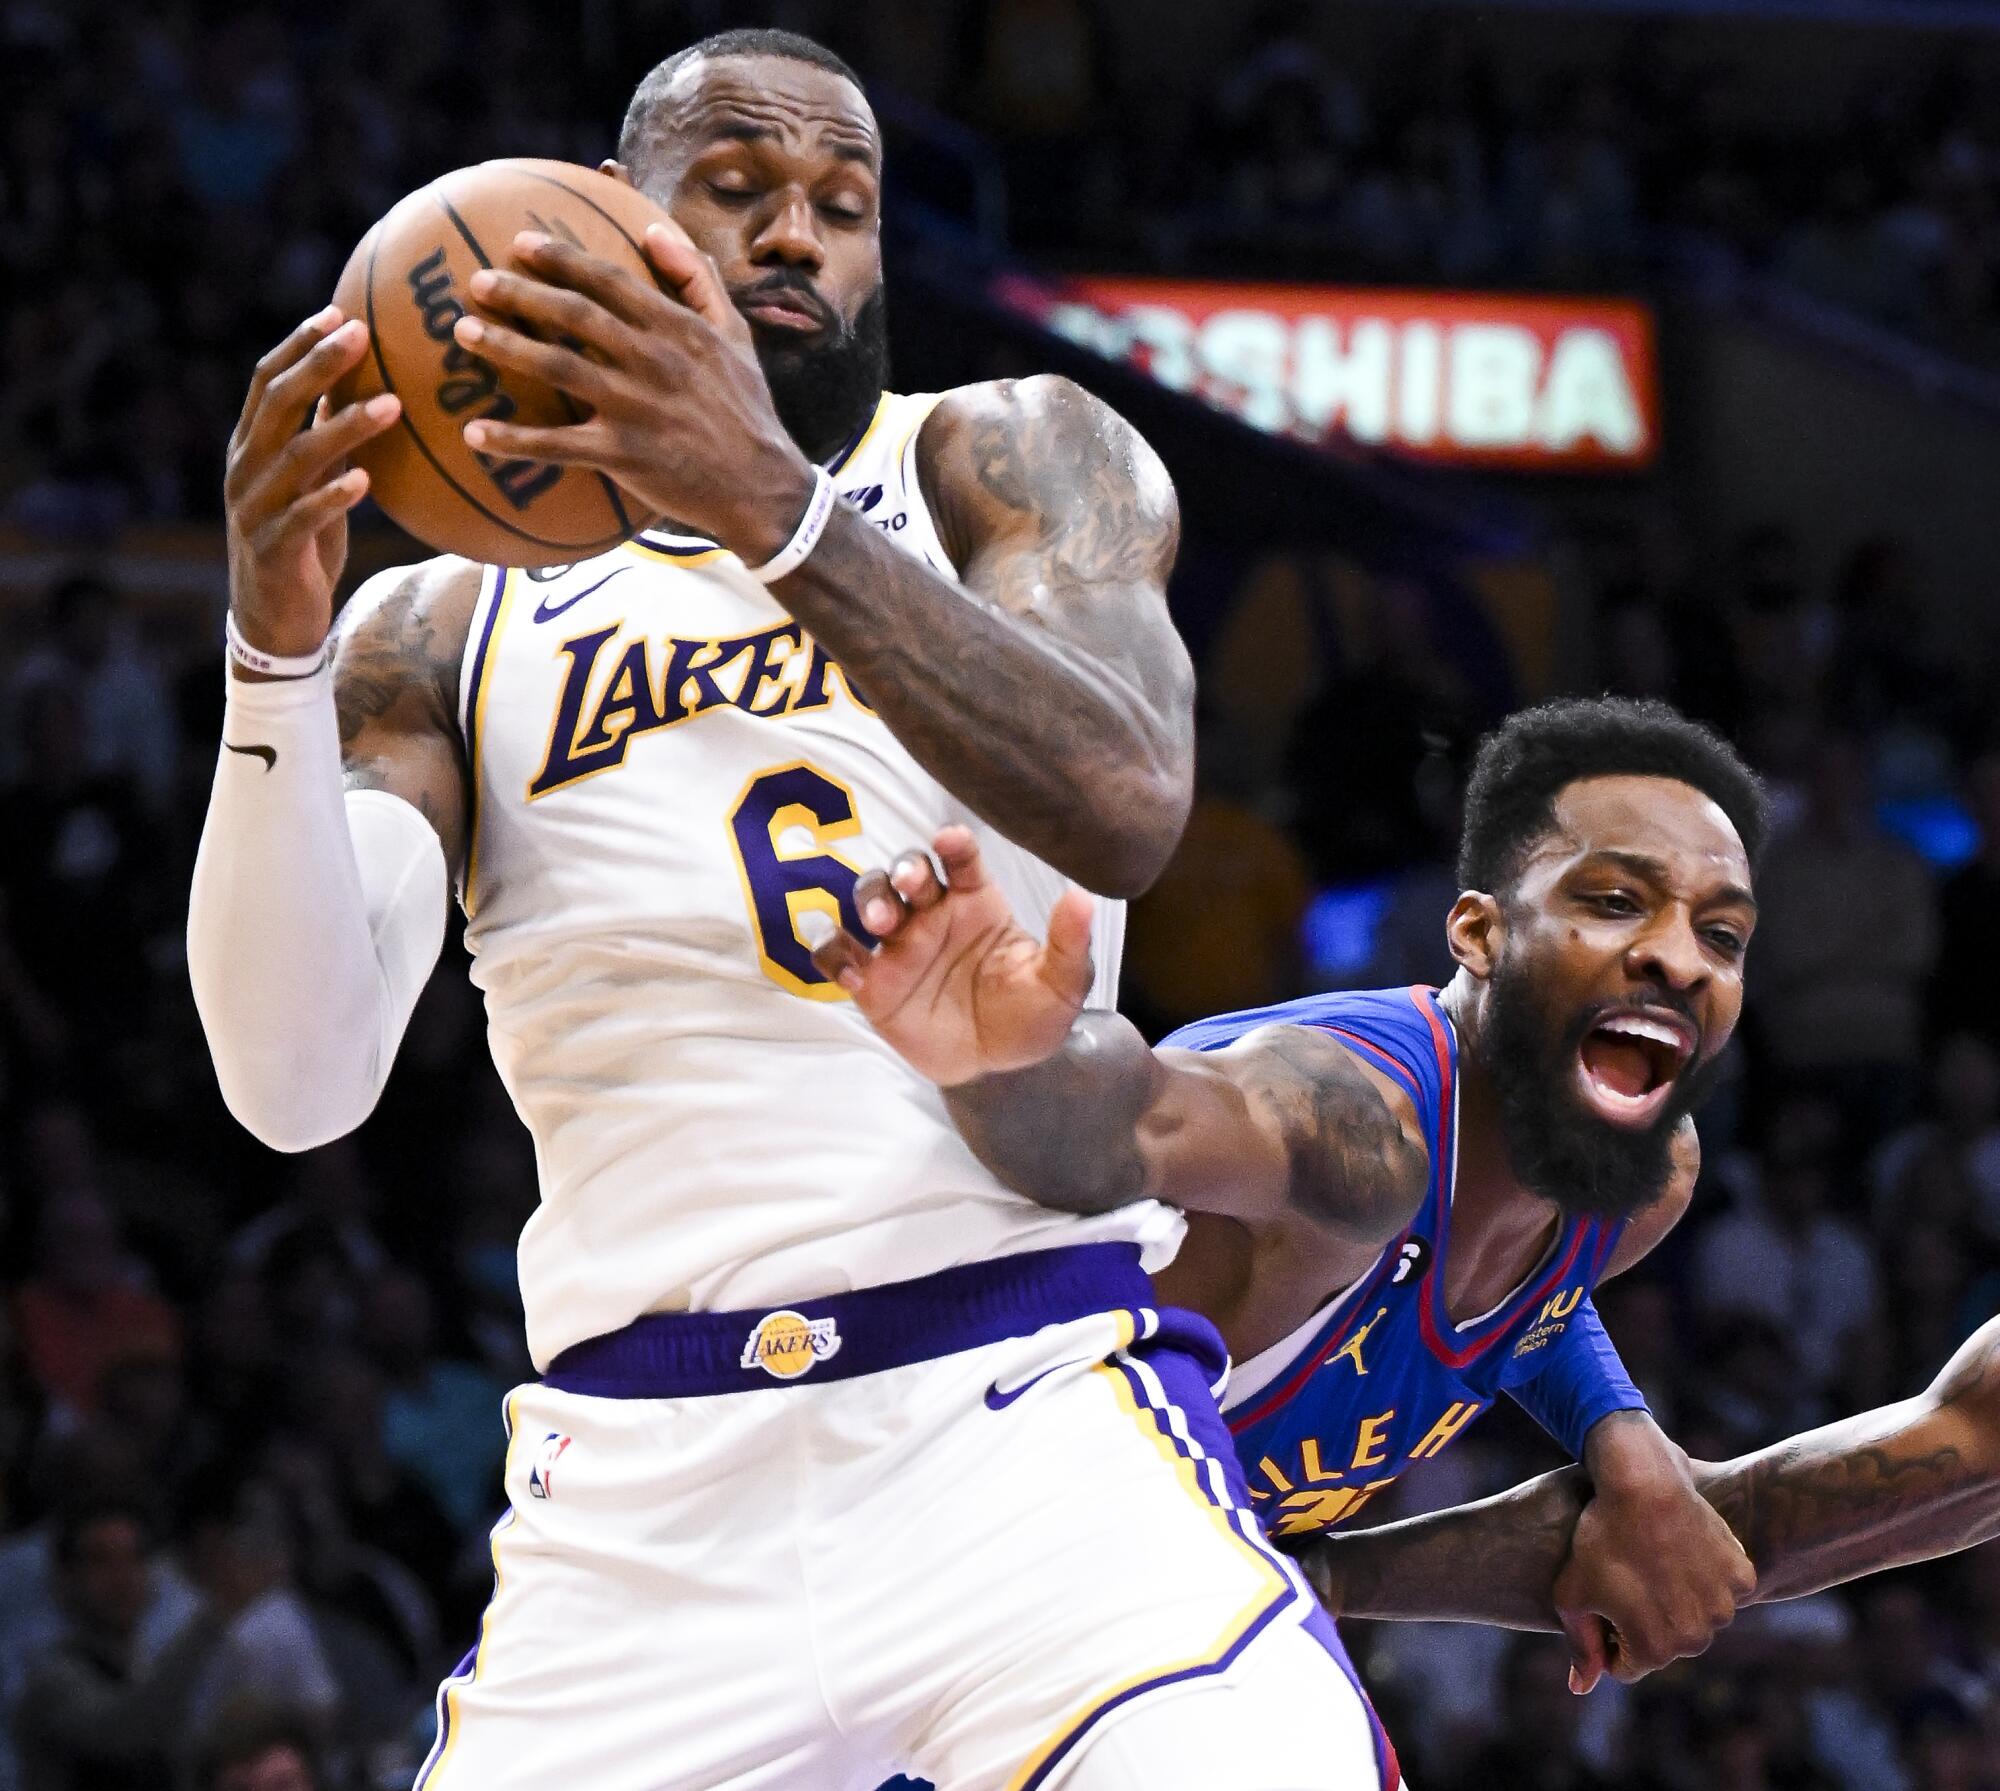 Lakers forward LeBron James, left, grabs a rebound in front of Nuggets forward Jeff Green.